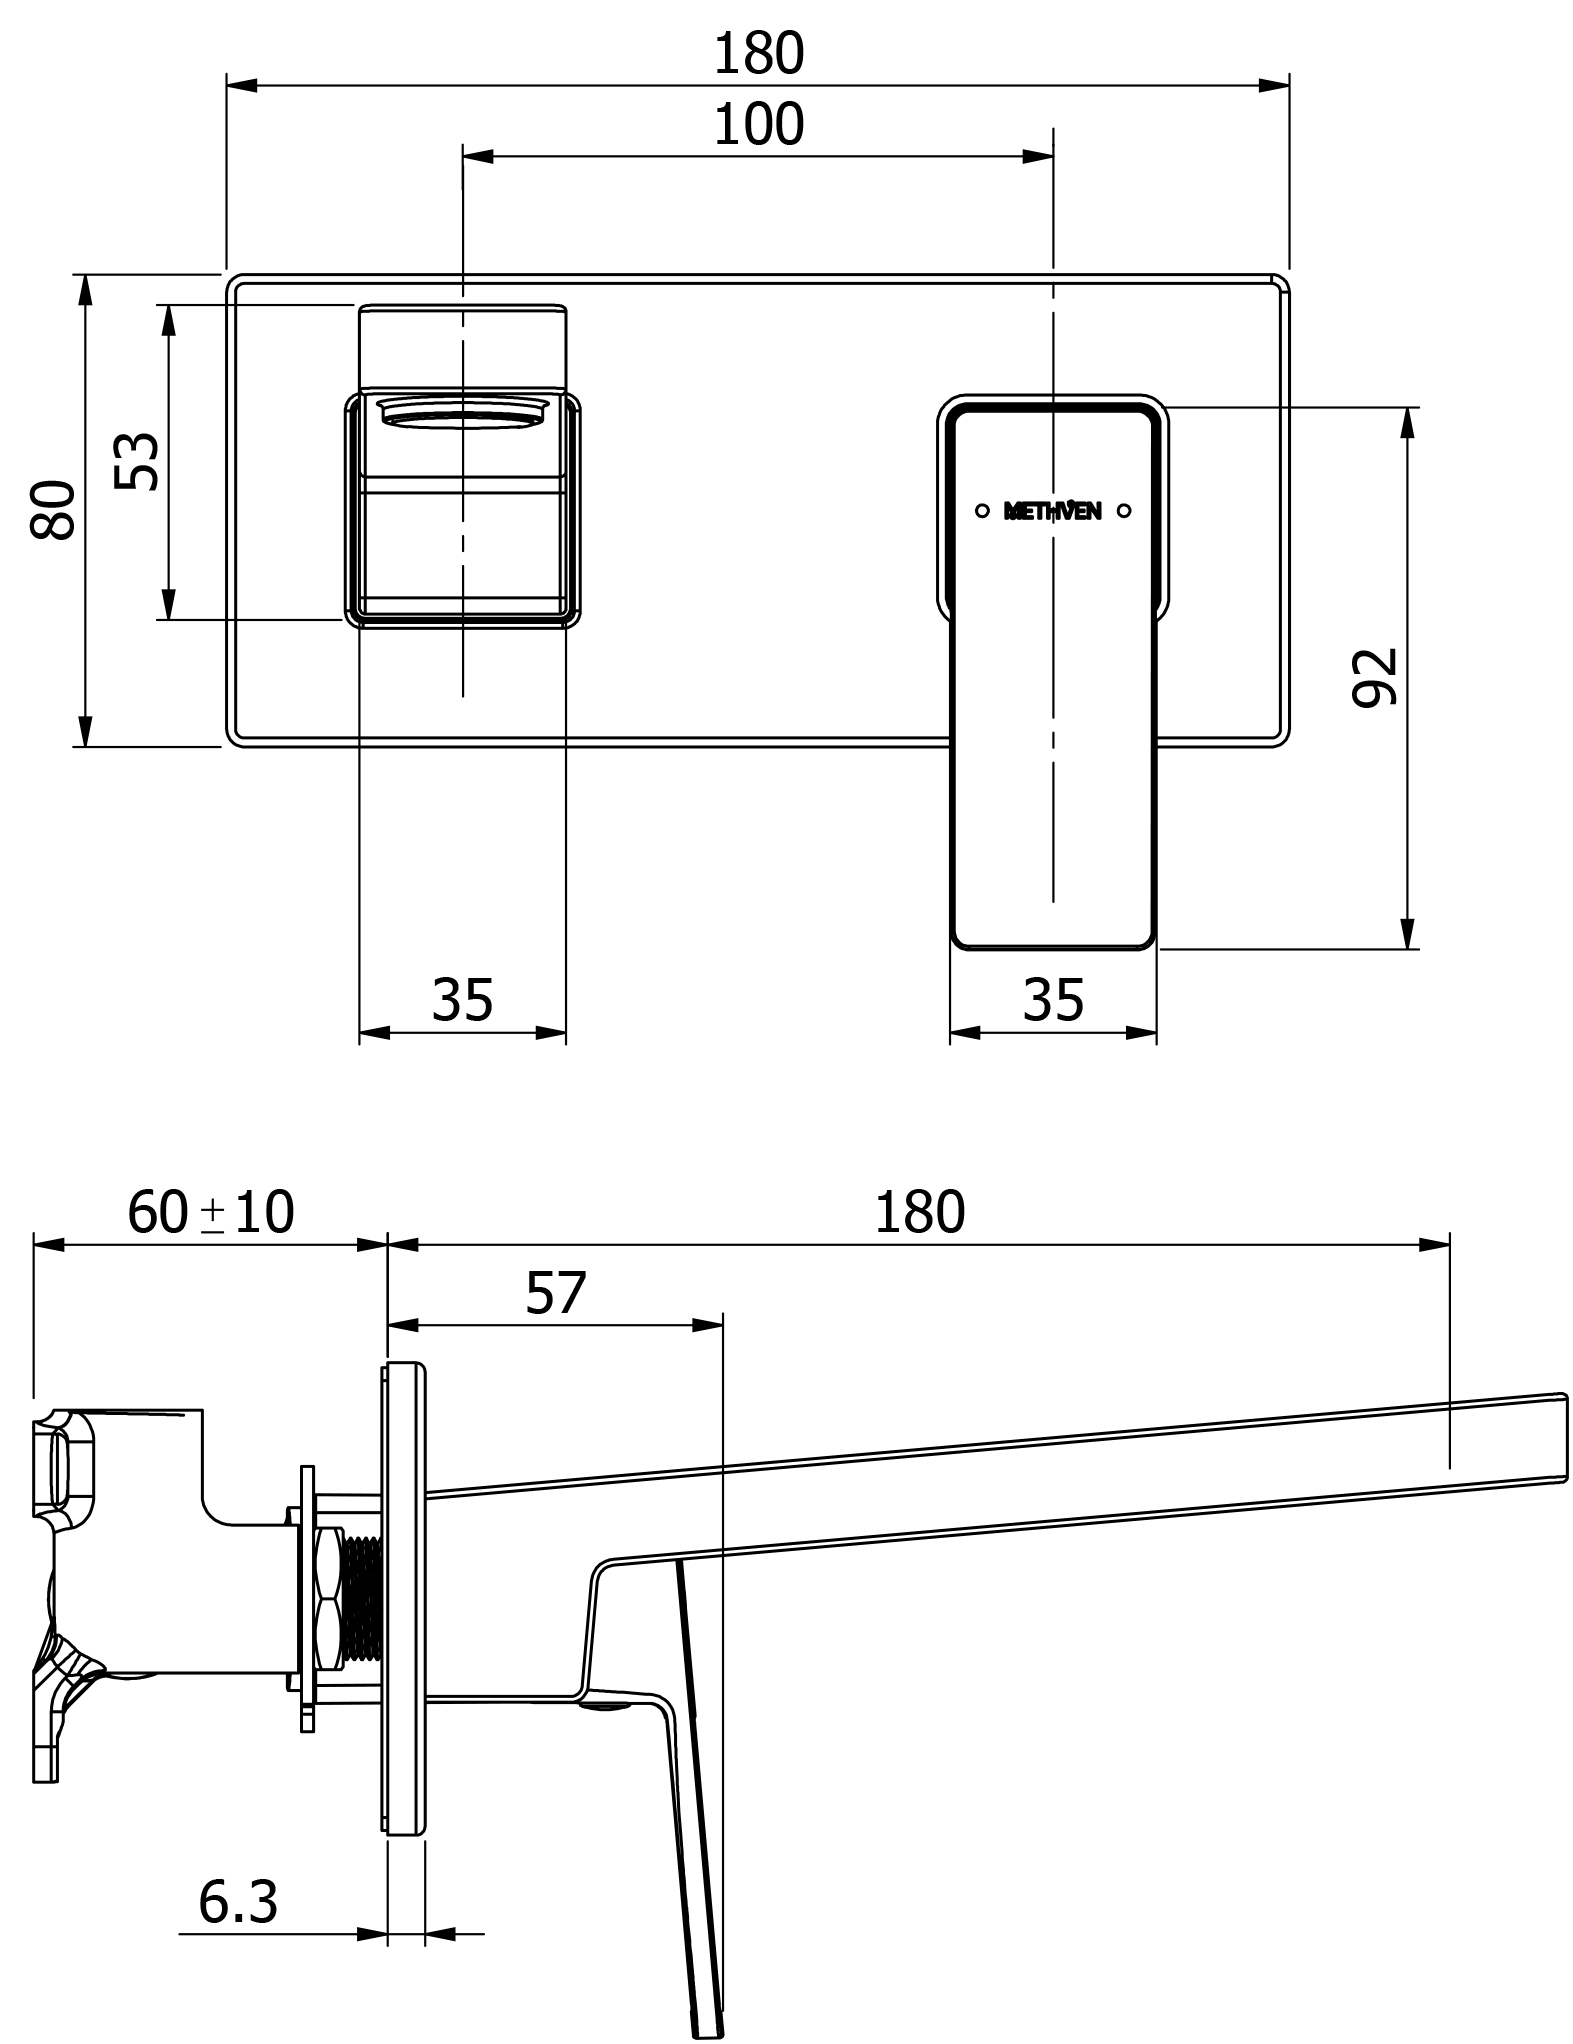 blaze-wall-mounted-single-lever-mixer-technical-drawing